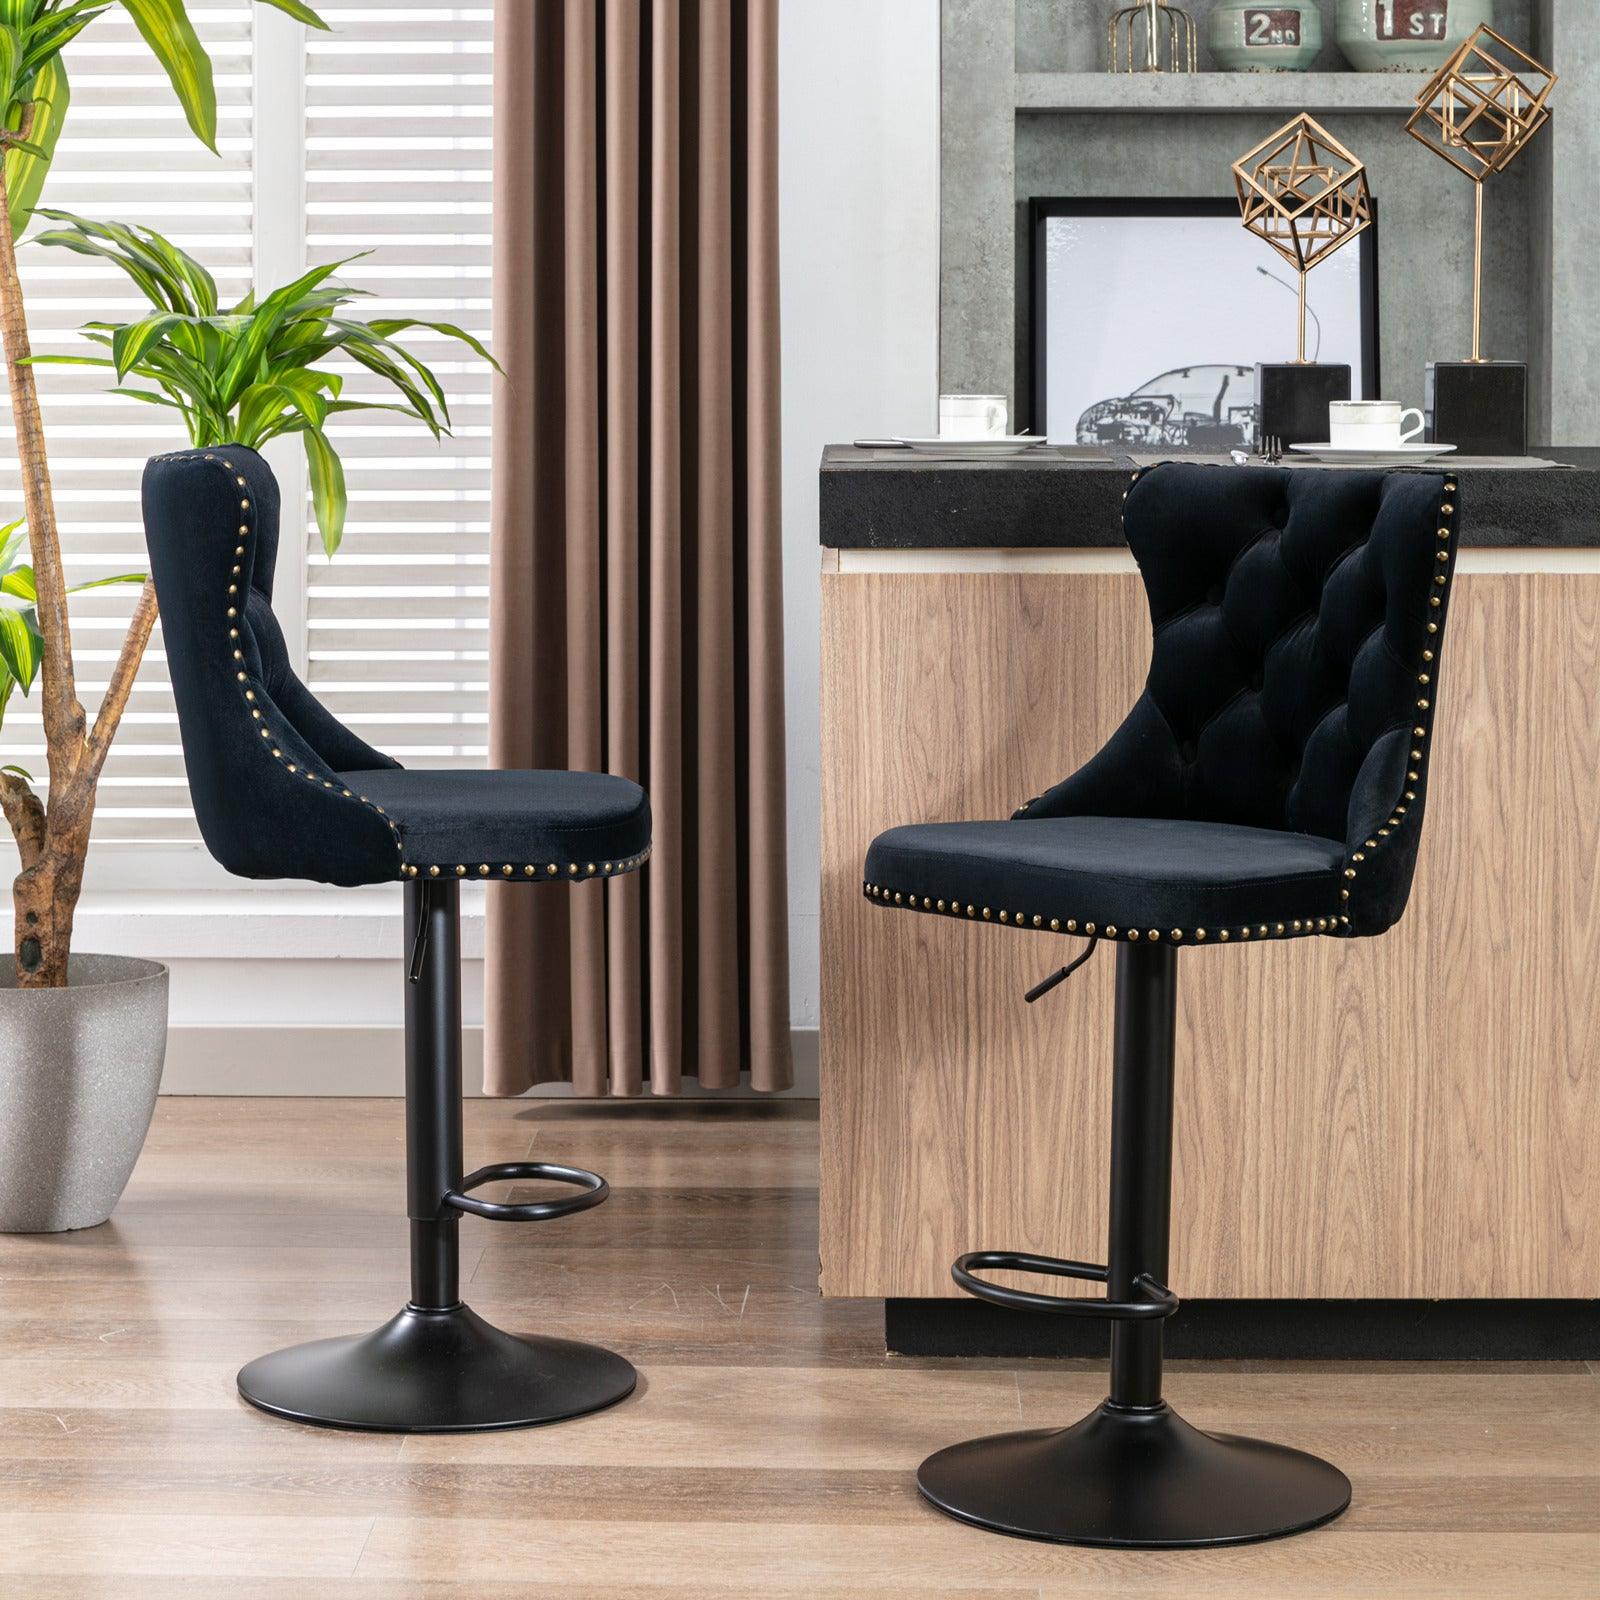 🆓🚛 Swivel Velvet Barstools Adjusatble Seat Height From 25-33 Inch, 17.7 Inch Base, Modern Upholstered Bar Stools With Backs Comfortable Tufted for Home Pub & Kitchen Island, Black, Set Of 2